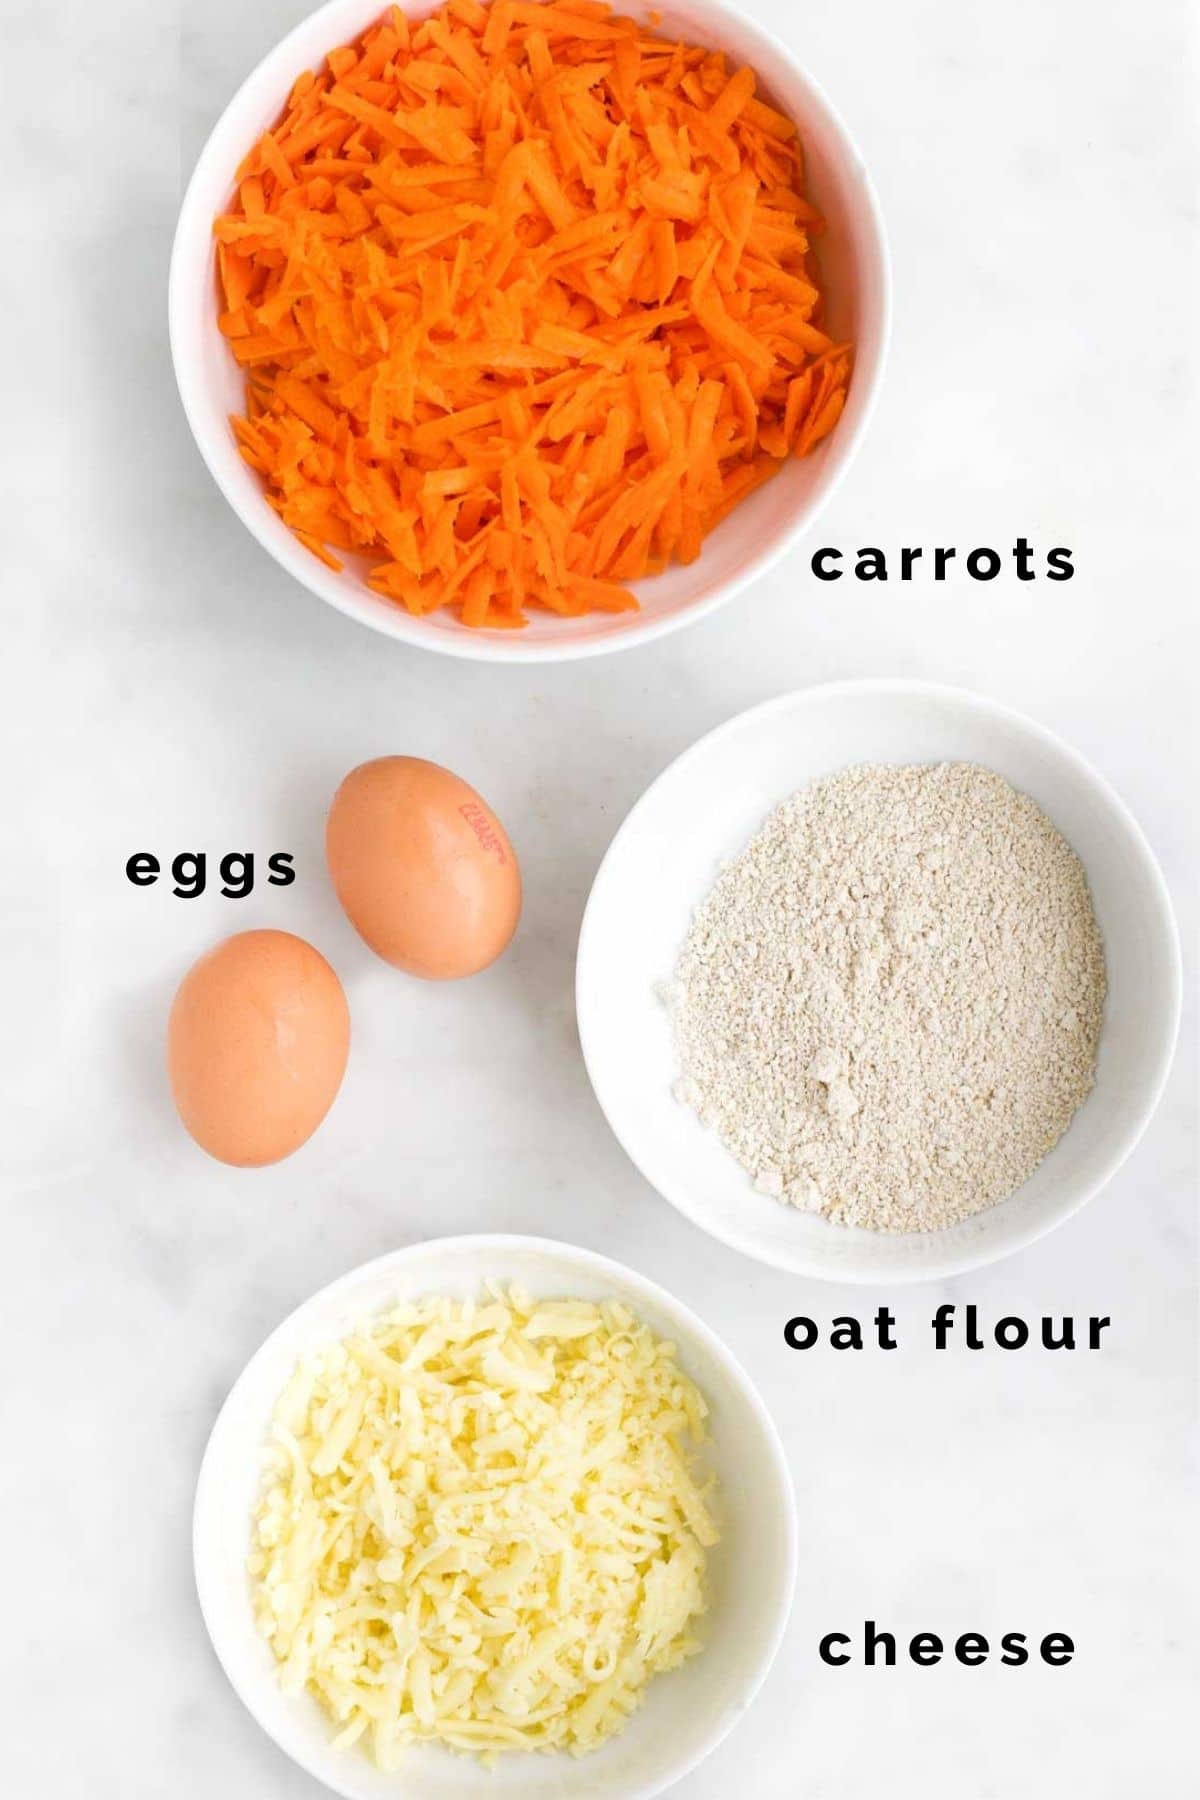 Flat Lay Shot of the Ingredients Needed to Make Carrot Stars. (Carrots, Oat flour, eggs and Cheese)